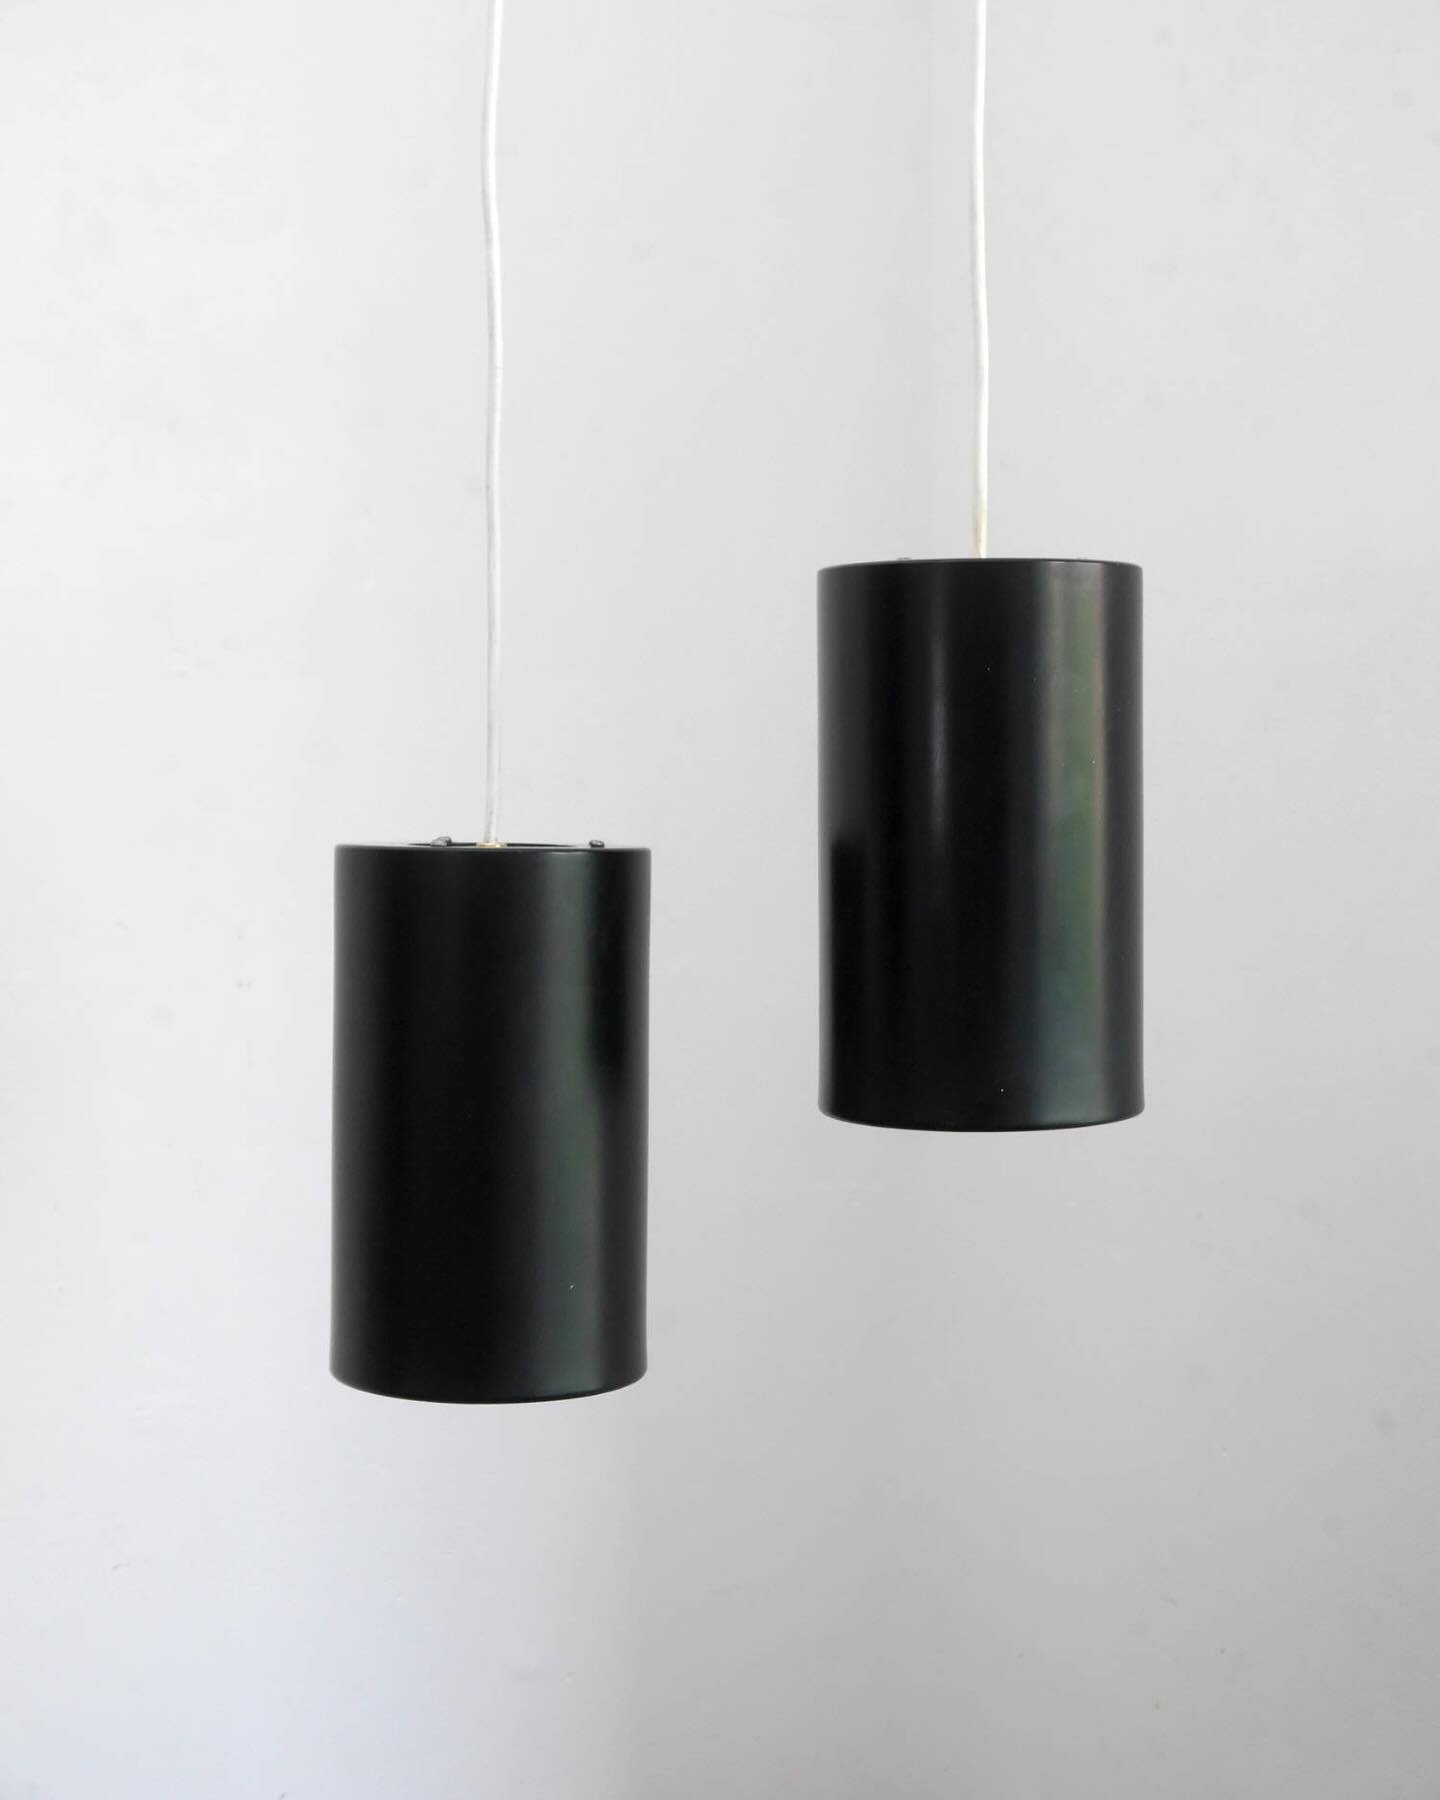 Just added to website - super-minimal 1960s pendant lights, most probably of British design although very similar to Dutch lighting by Raak or Philips.